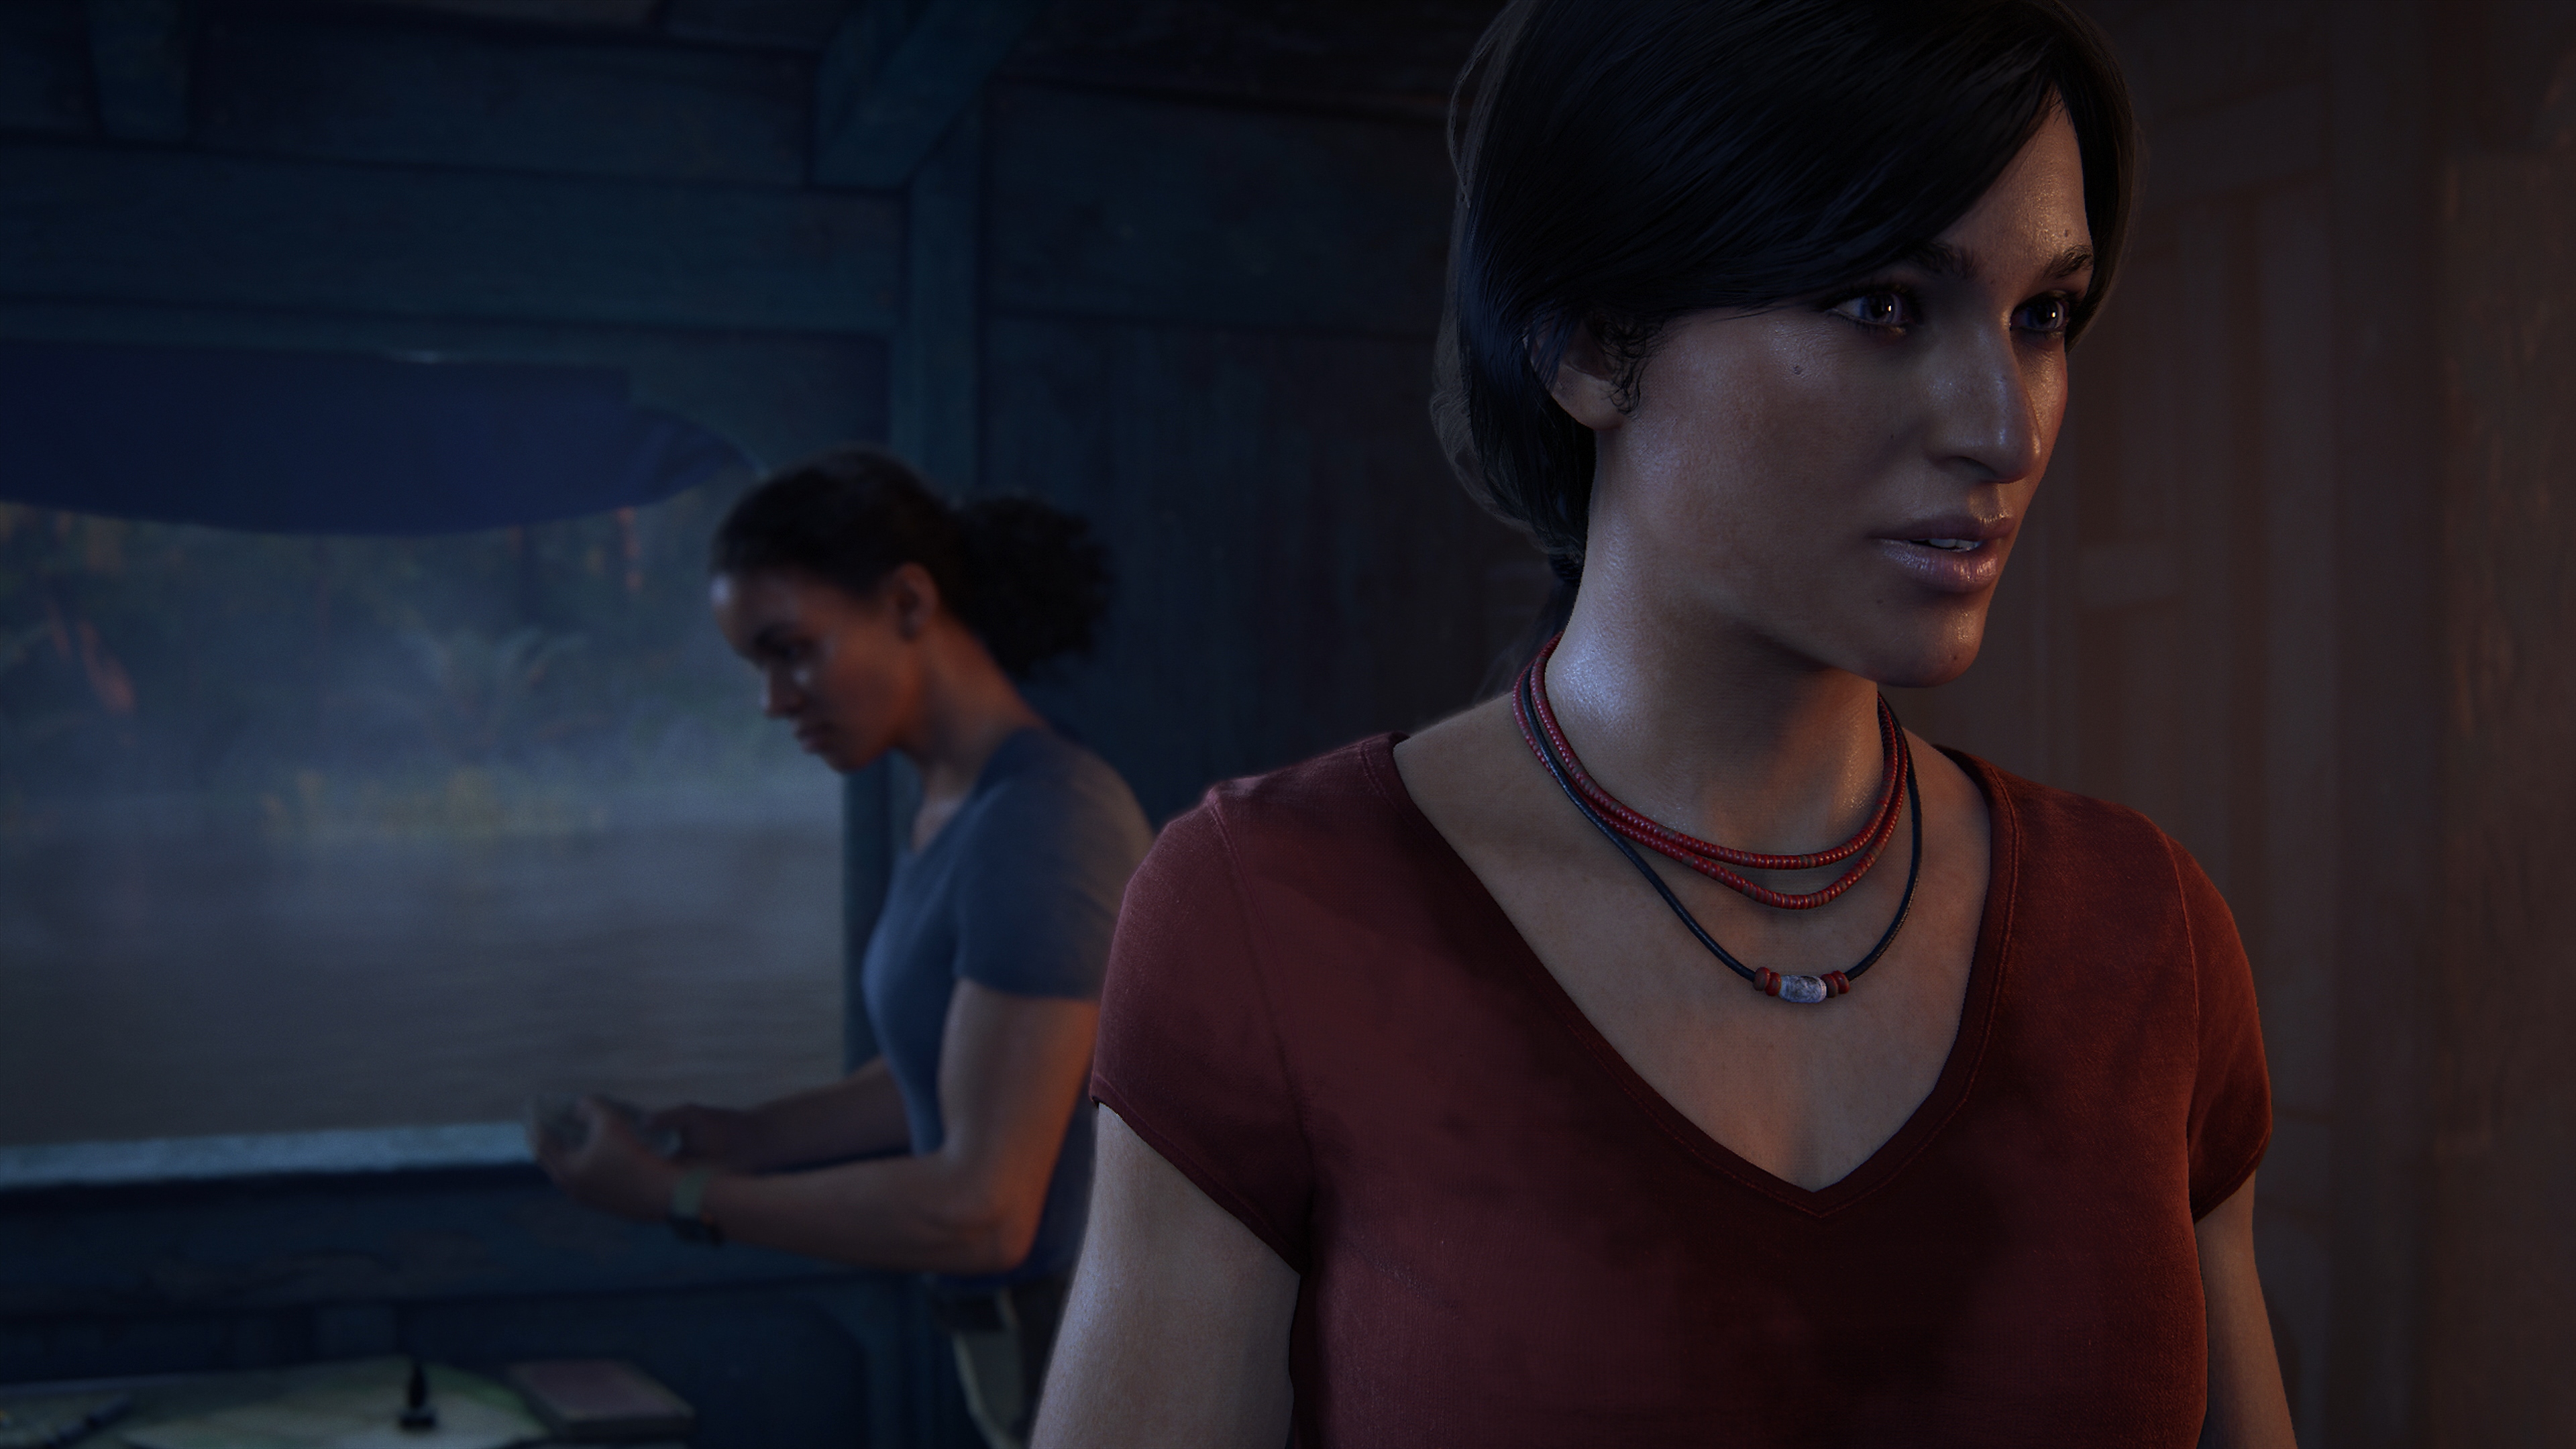 UNCHARTED the lost legacy screenshot